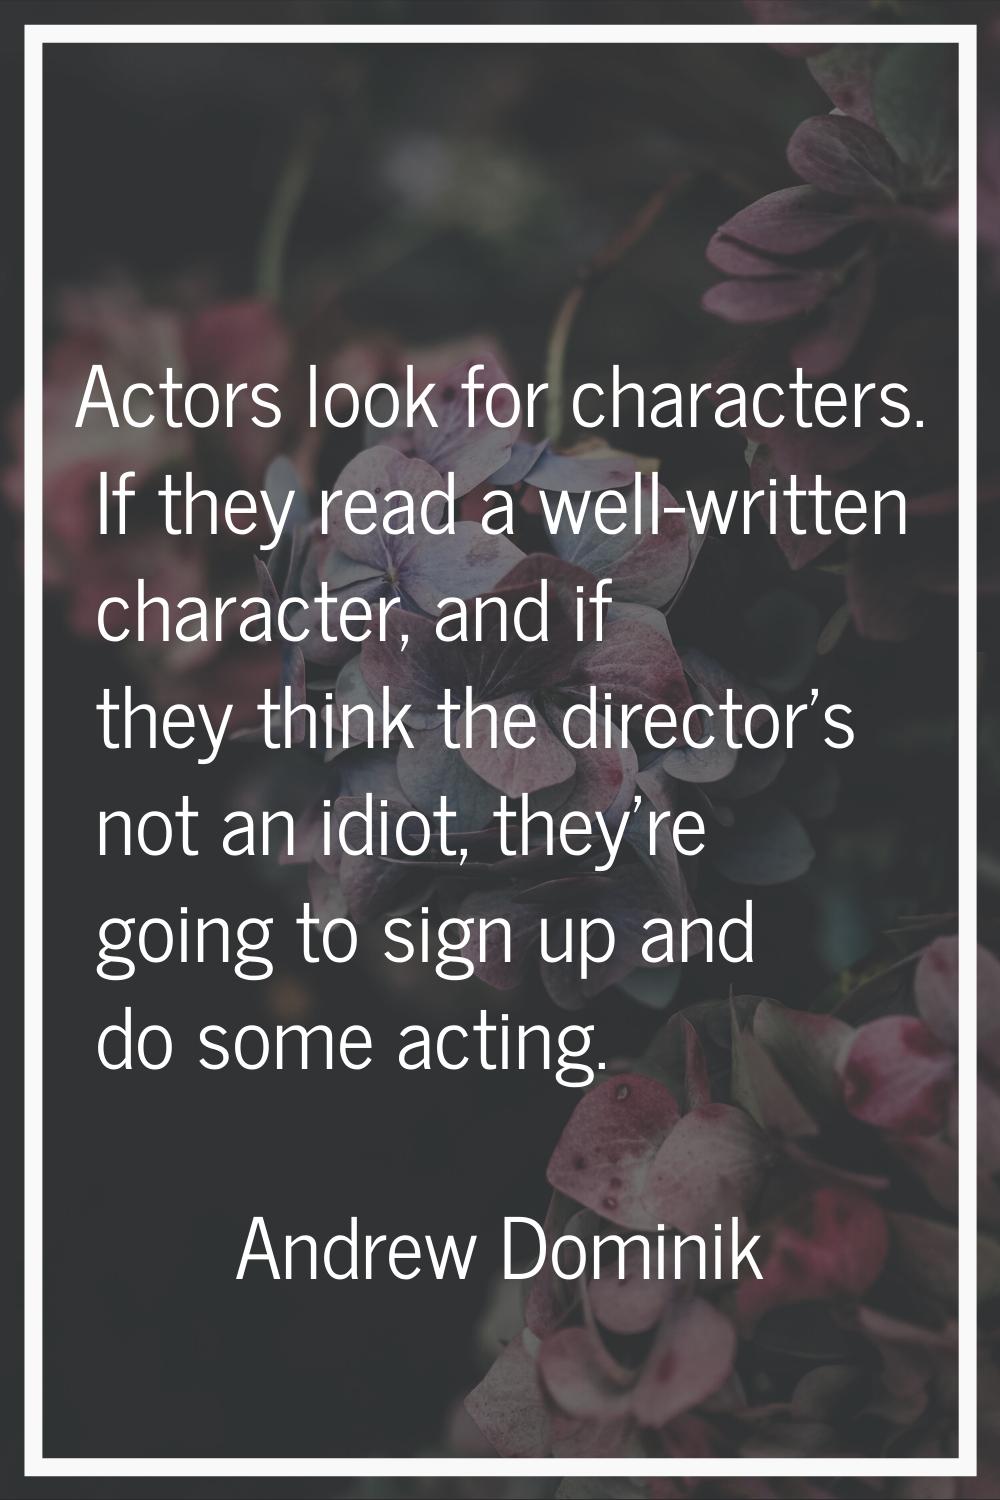 Actors look for characters. If they read a well-written character, and if they think the director's